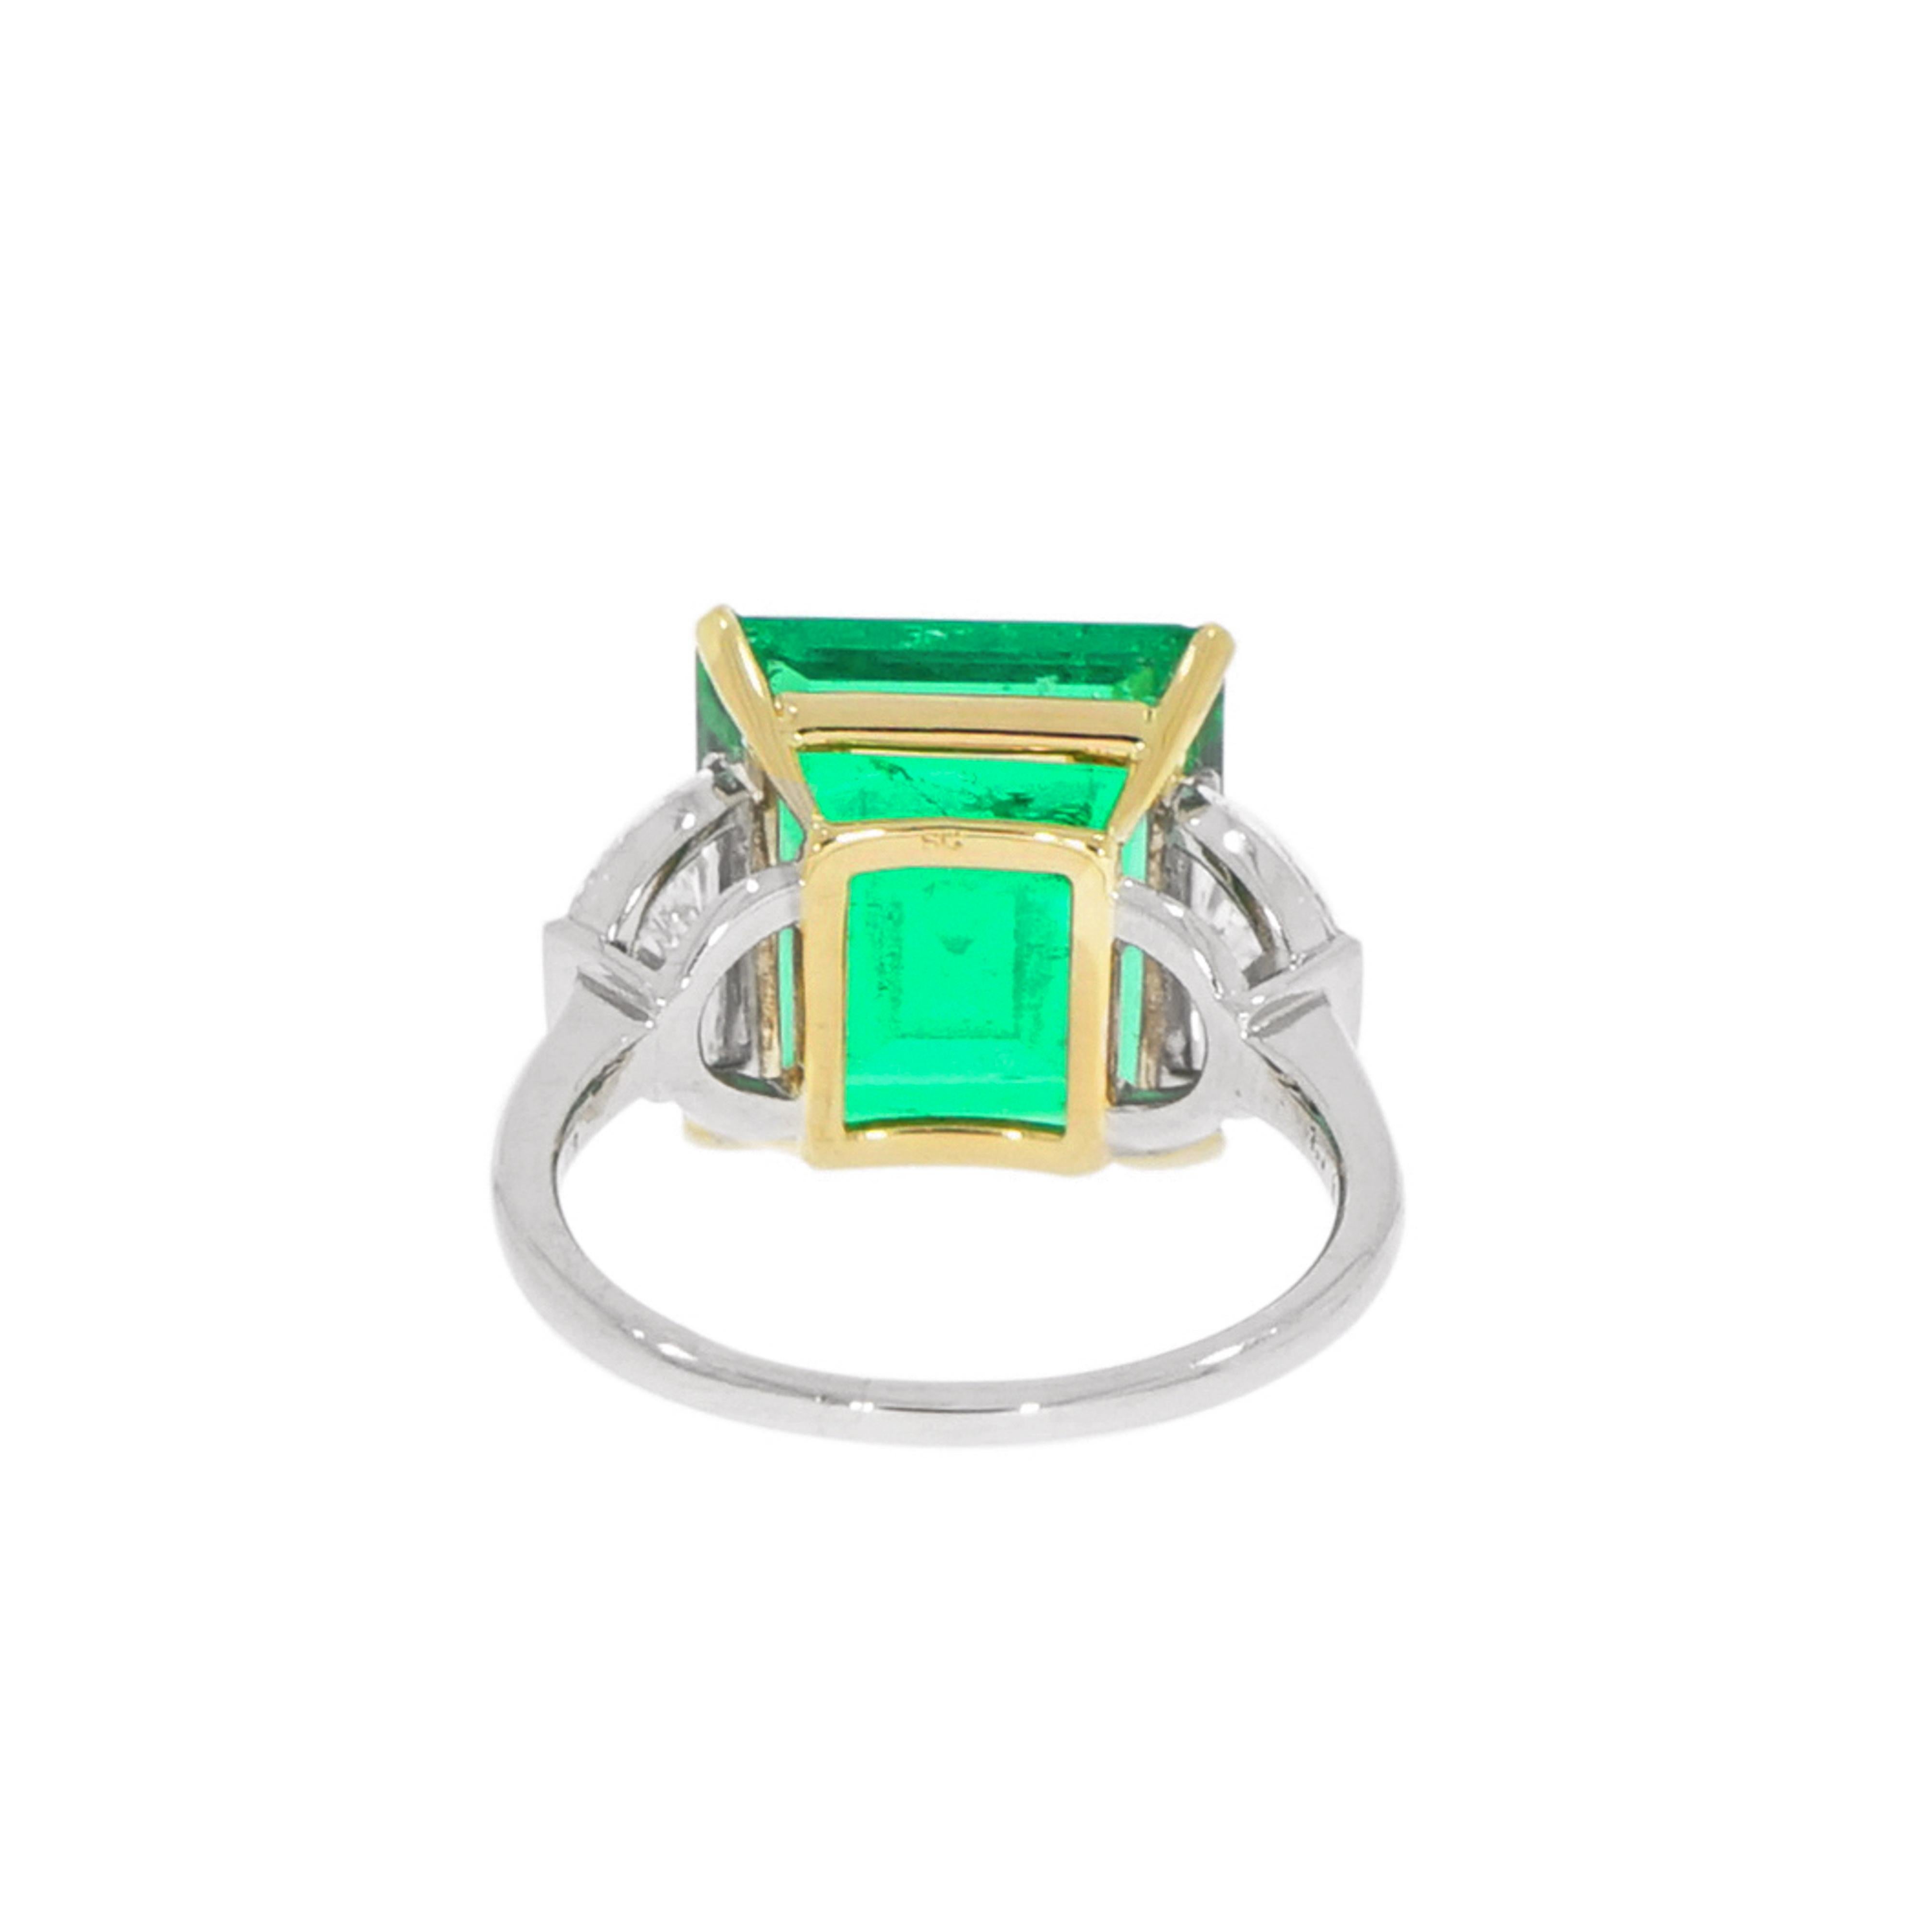 Emerald Cut Certified 7.43 Carat Colombian Emerald and Diamond Cocktail Ring For Sale